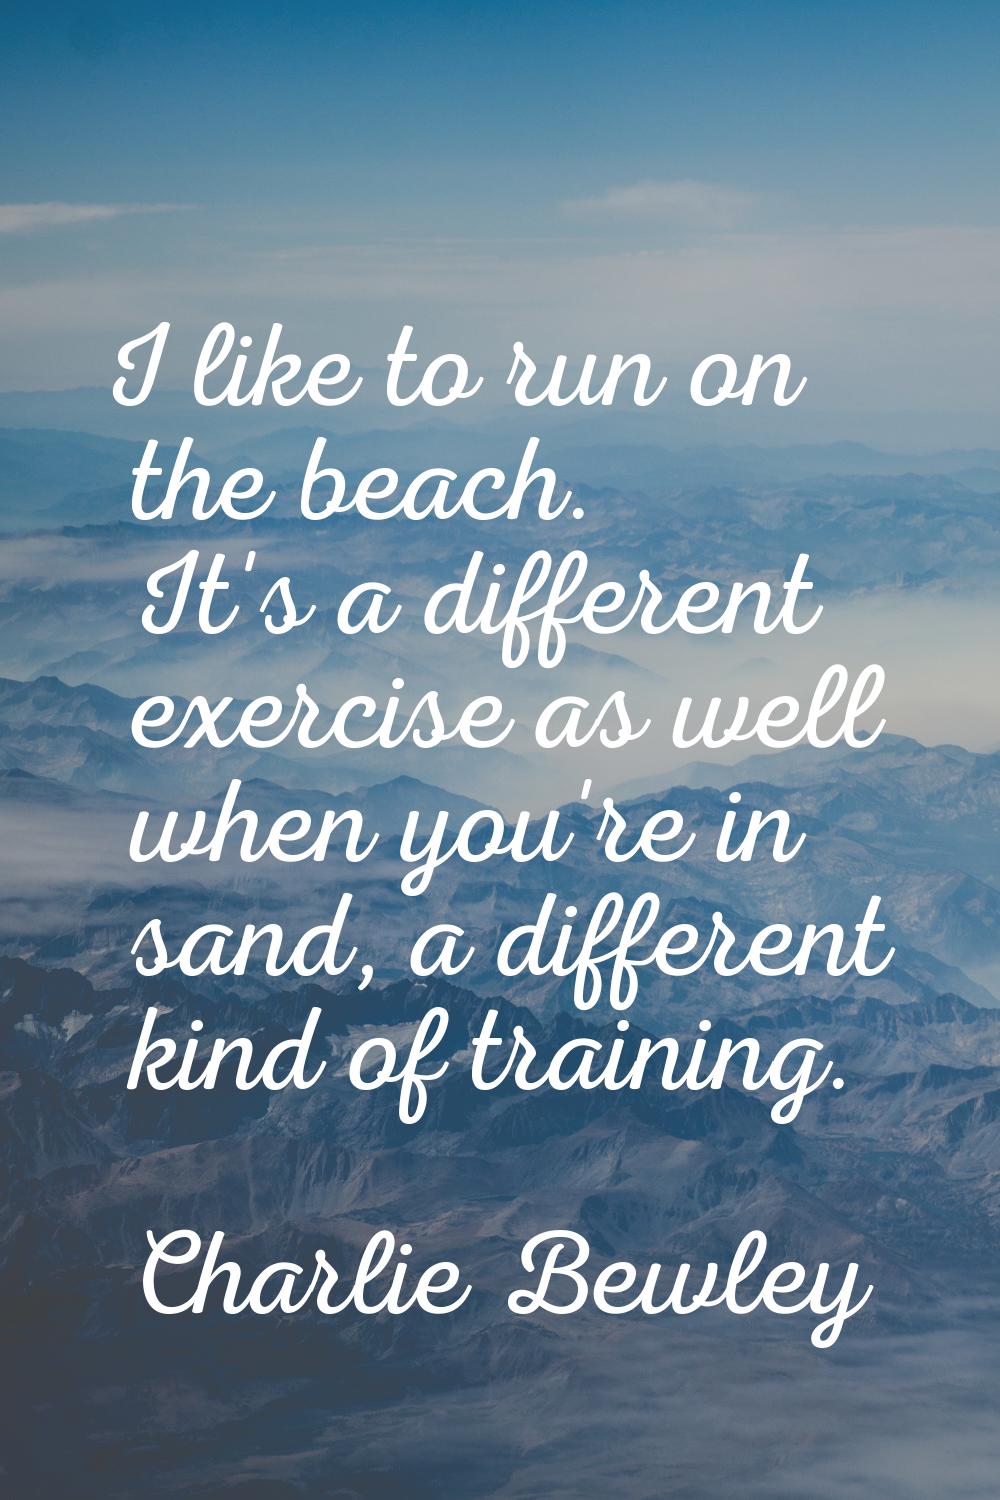 I like to run on the beach. It's a different exercise as well when you're in sand, a different kind